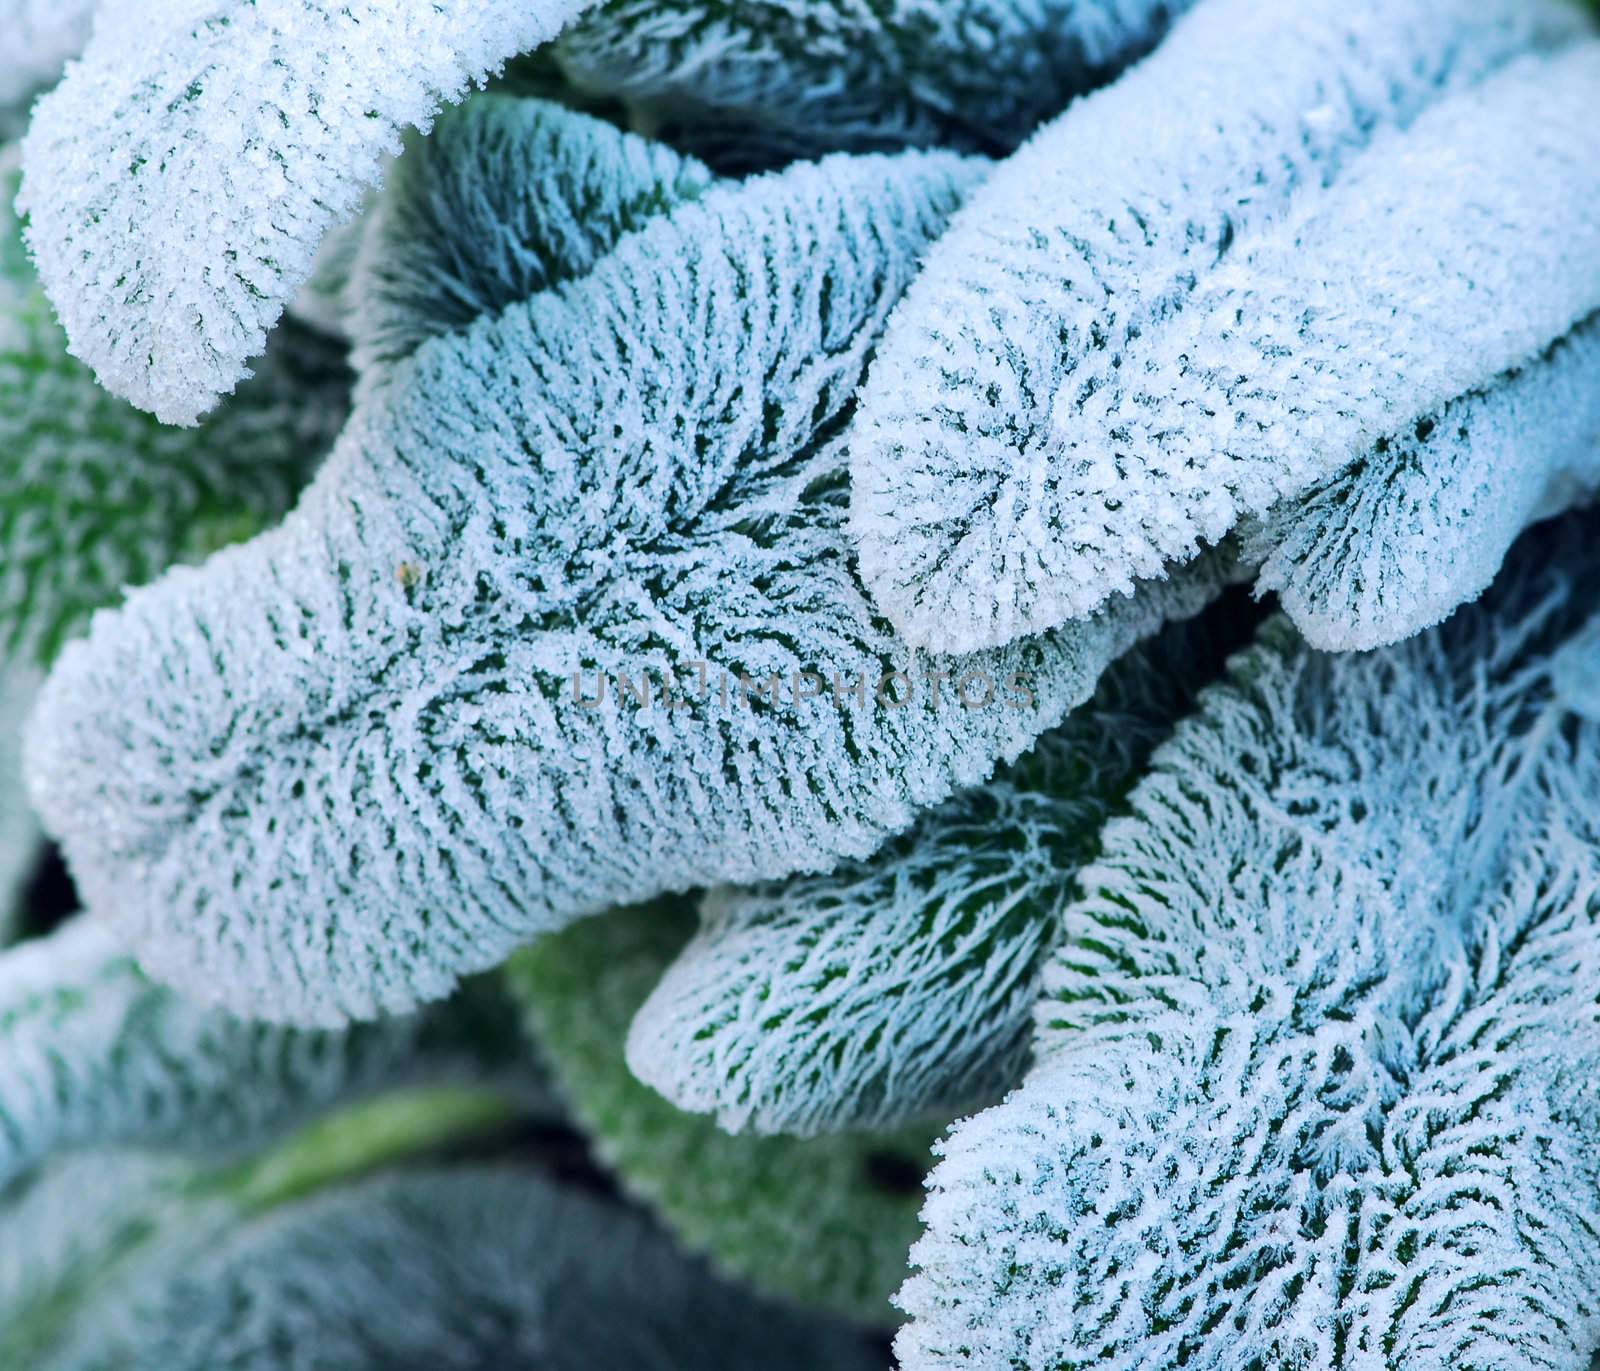 Morning frost on plant leaves in late fall